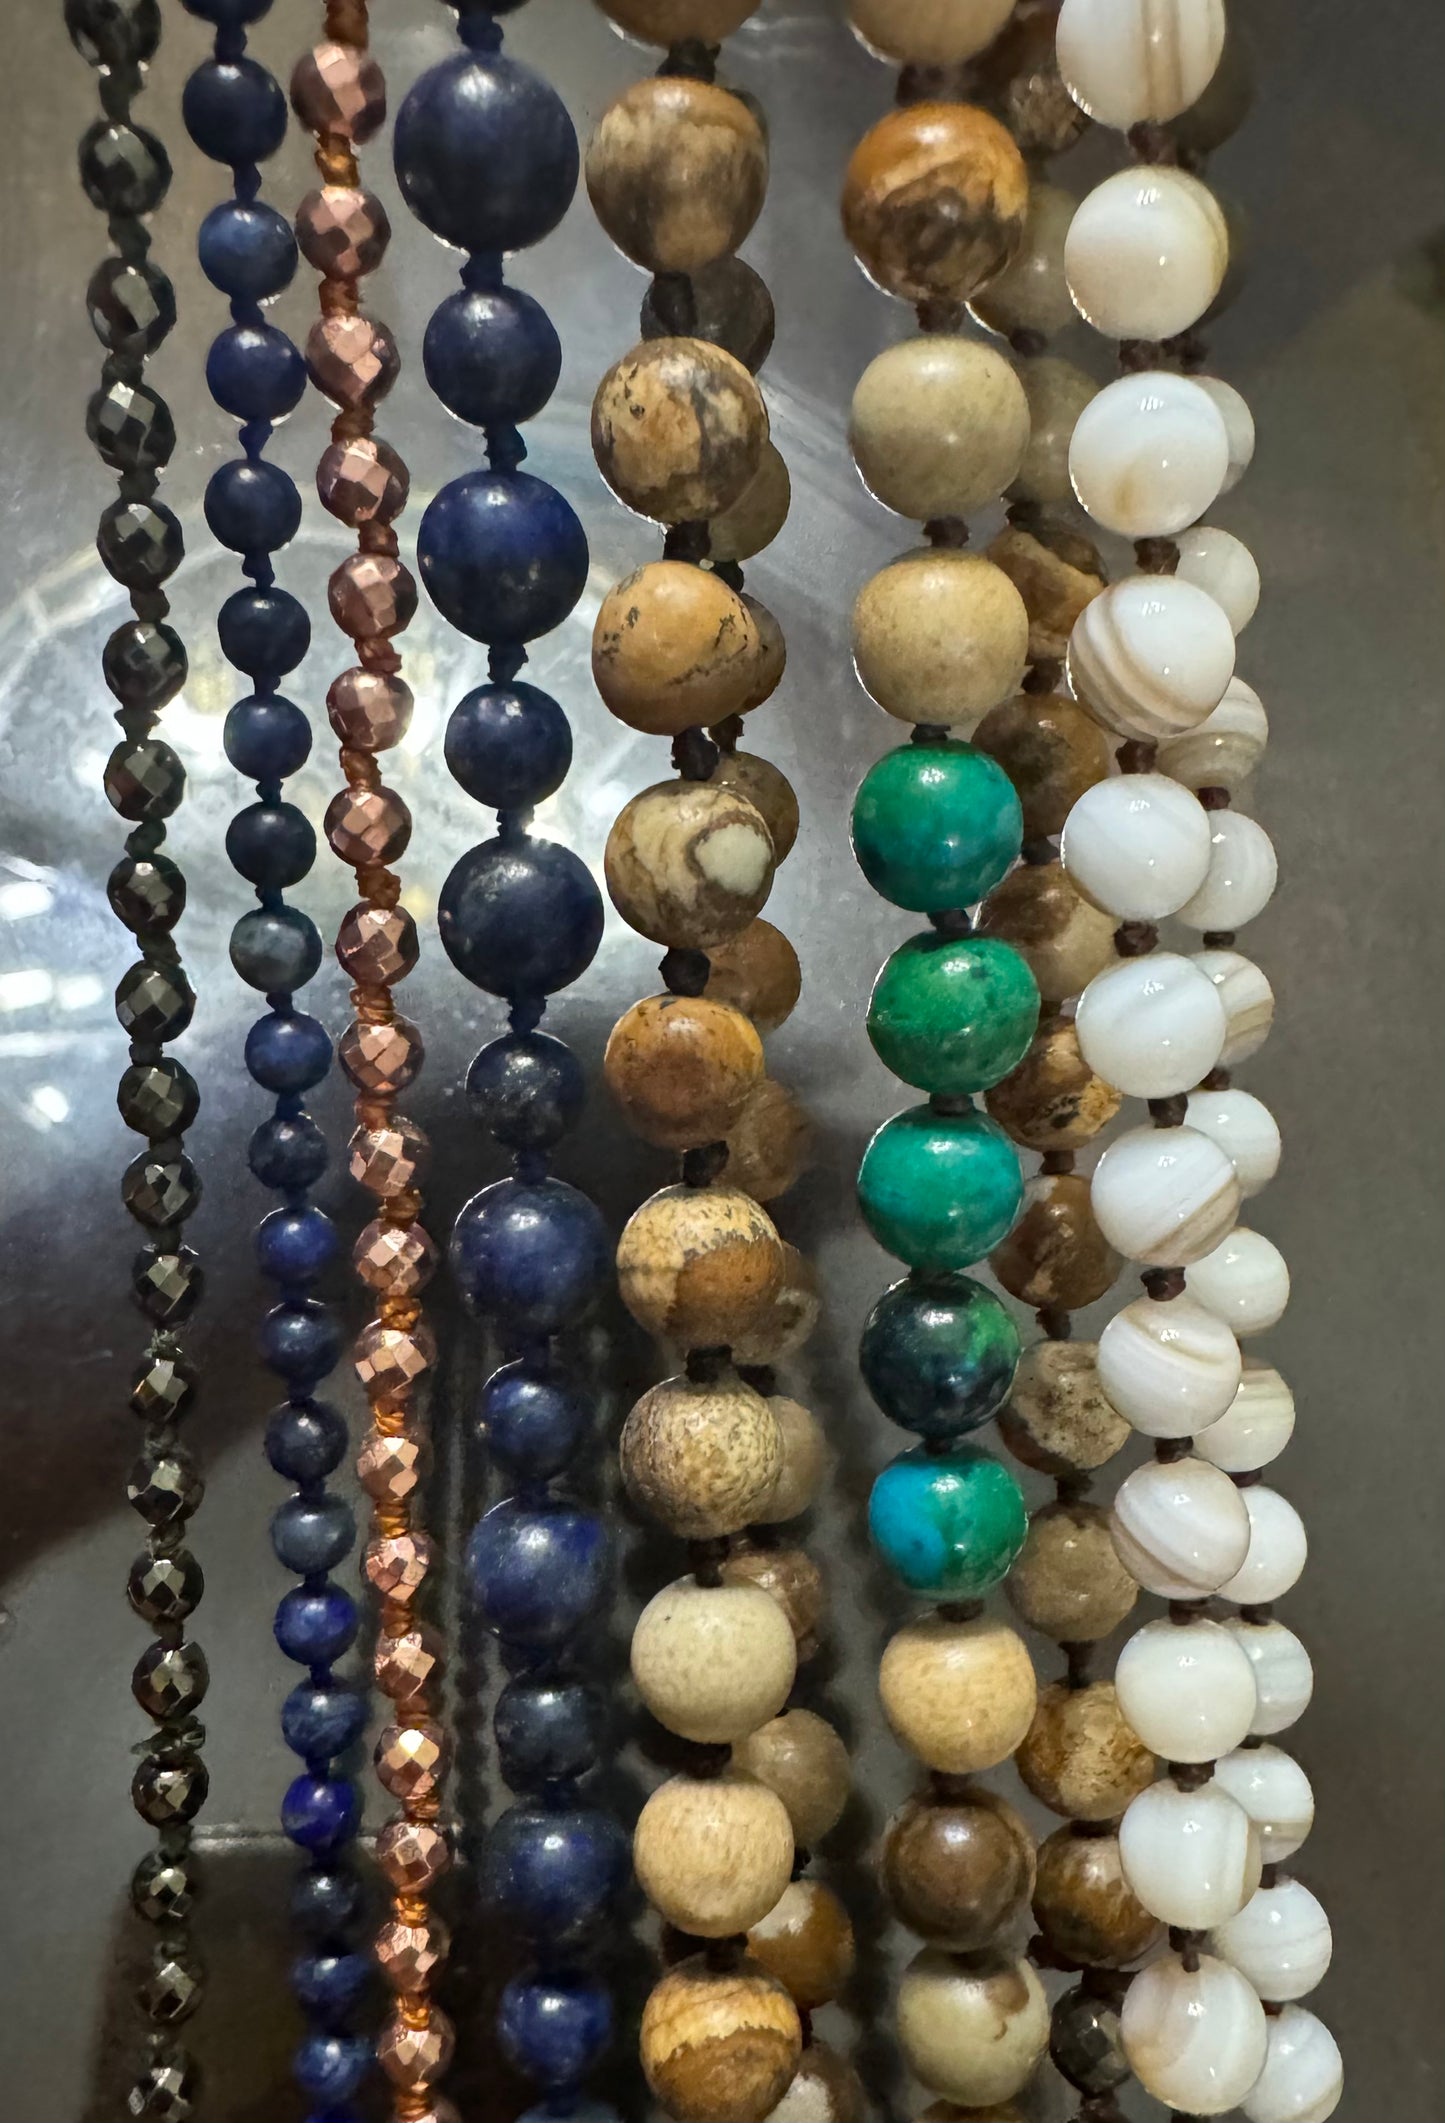 Natural Stone Bead Necklace